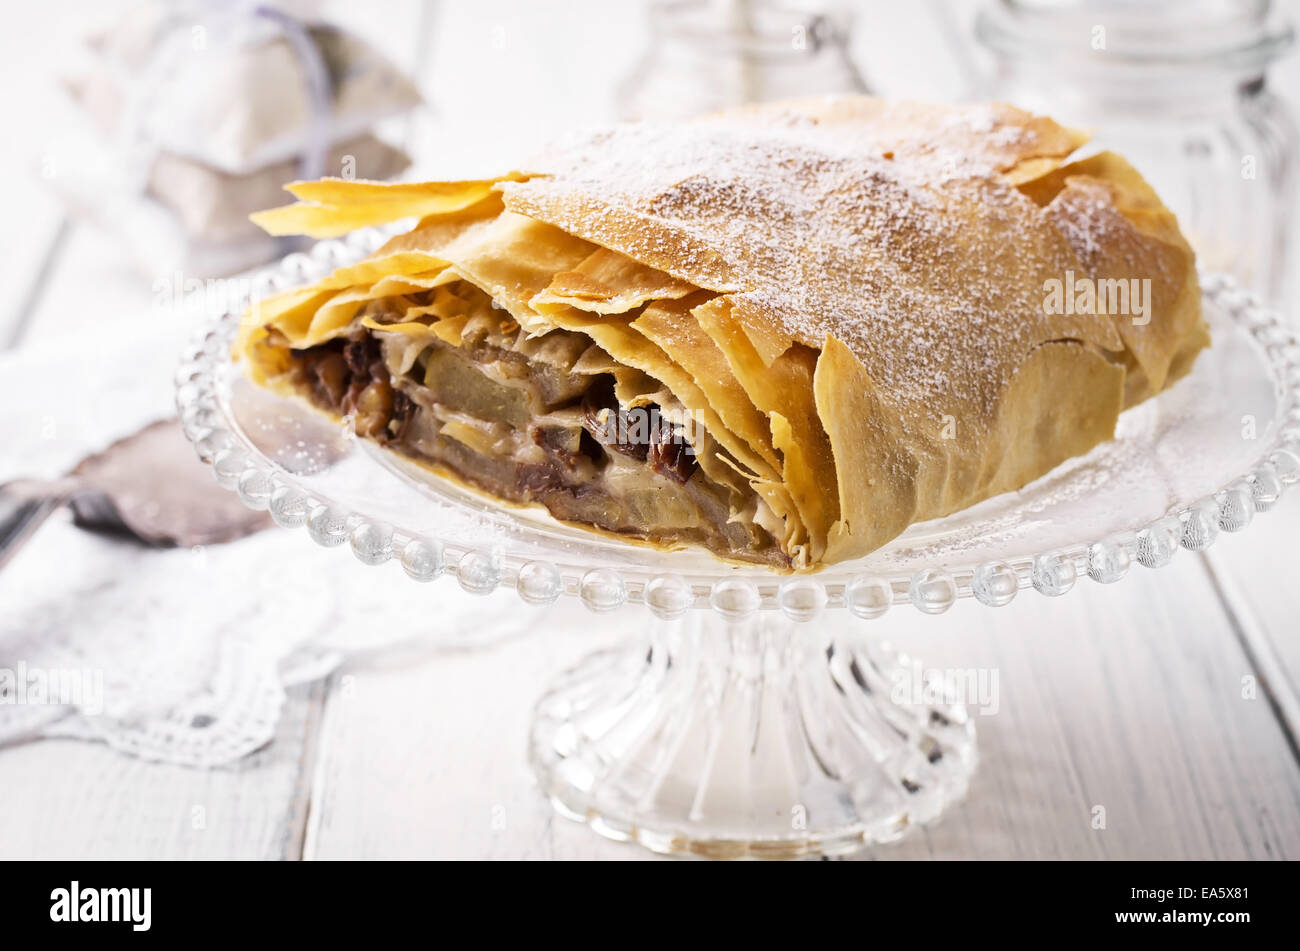 pastry with apple filling Stock Photo